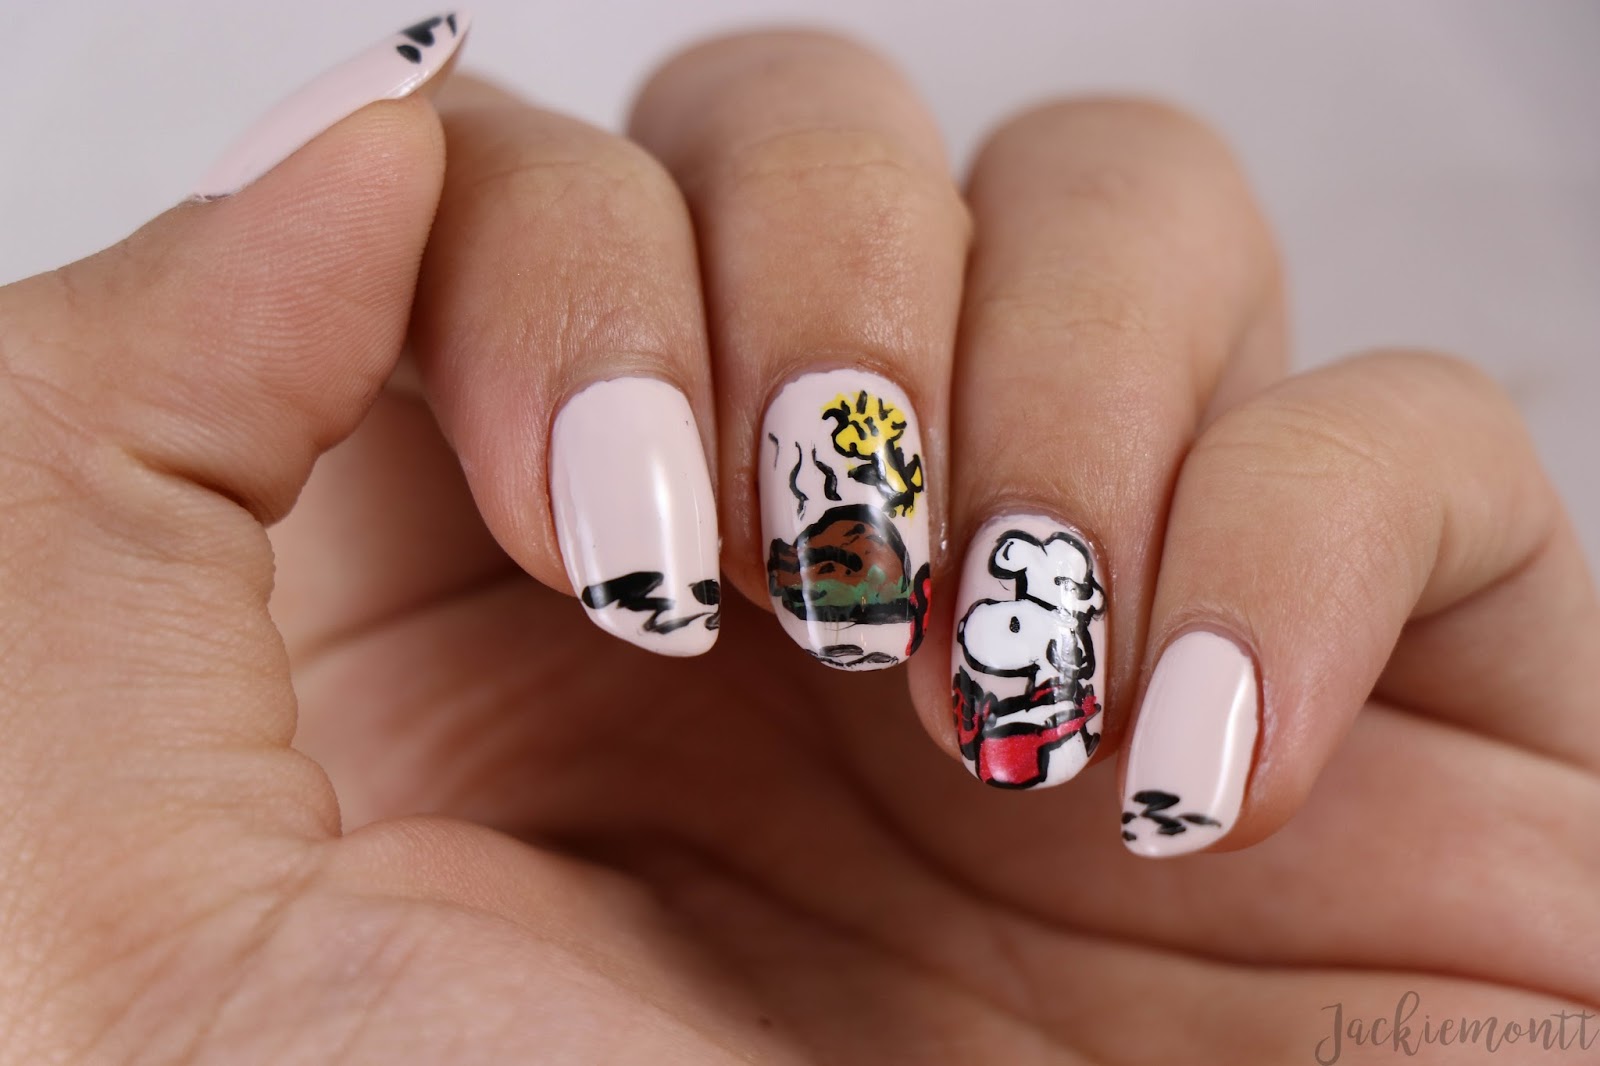 Thanksgiving Nail Art Ideas: 10 Cool Designs to Try This Year - wide 9